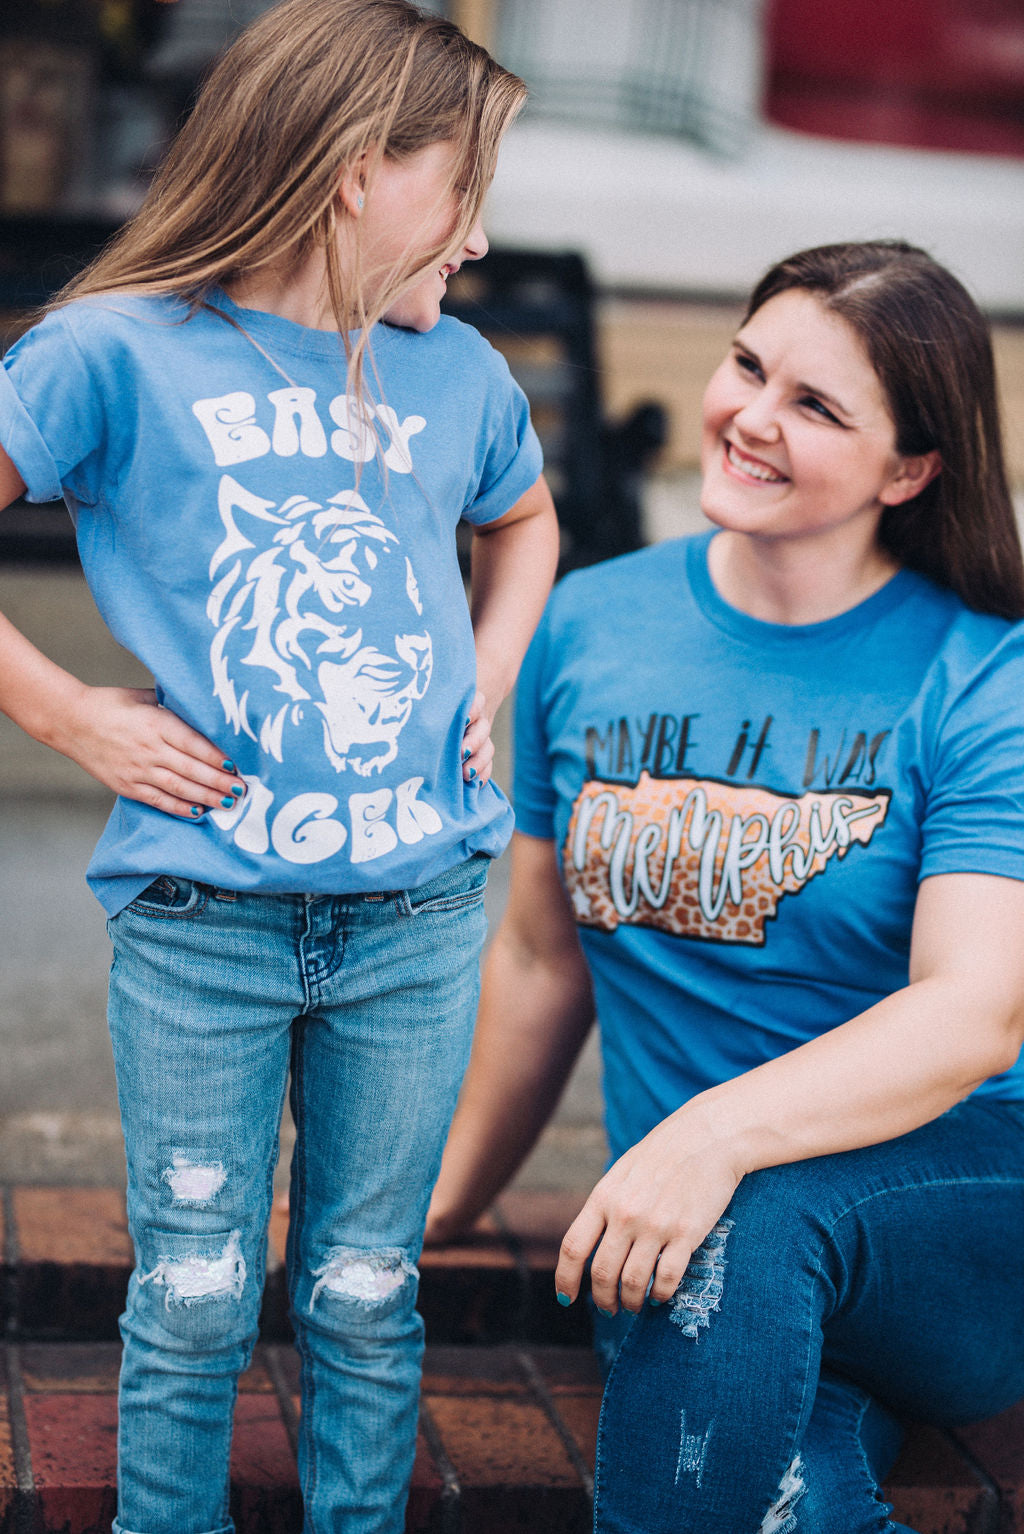 Easy Tiger Tee /Youth And Adult Sizes Available / Go Tigers Shirt